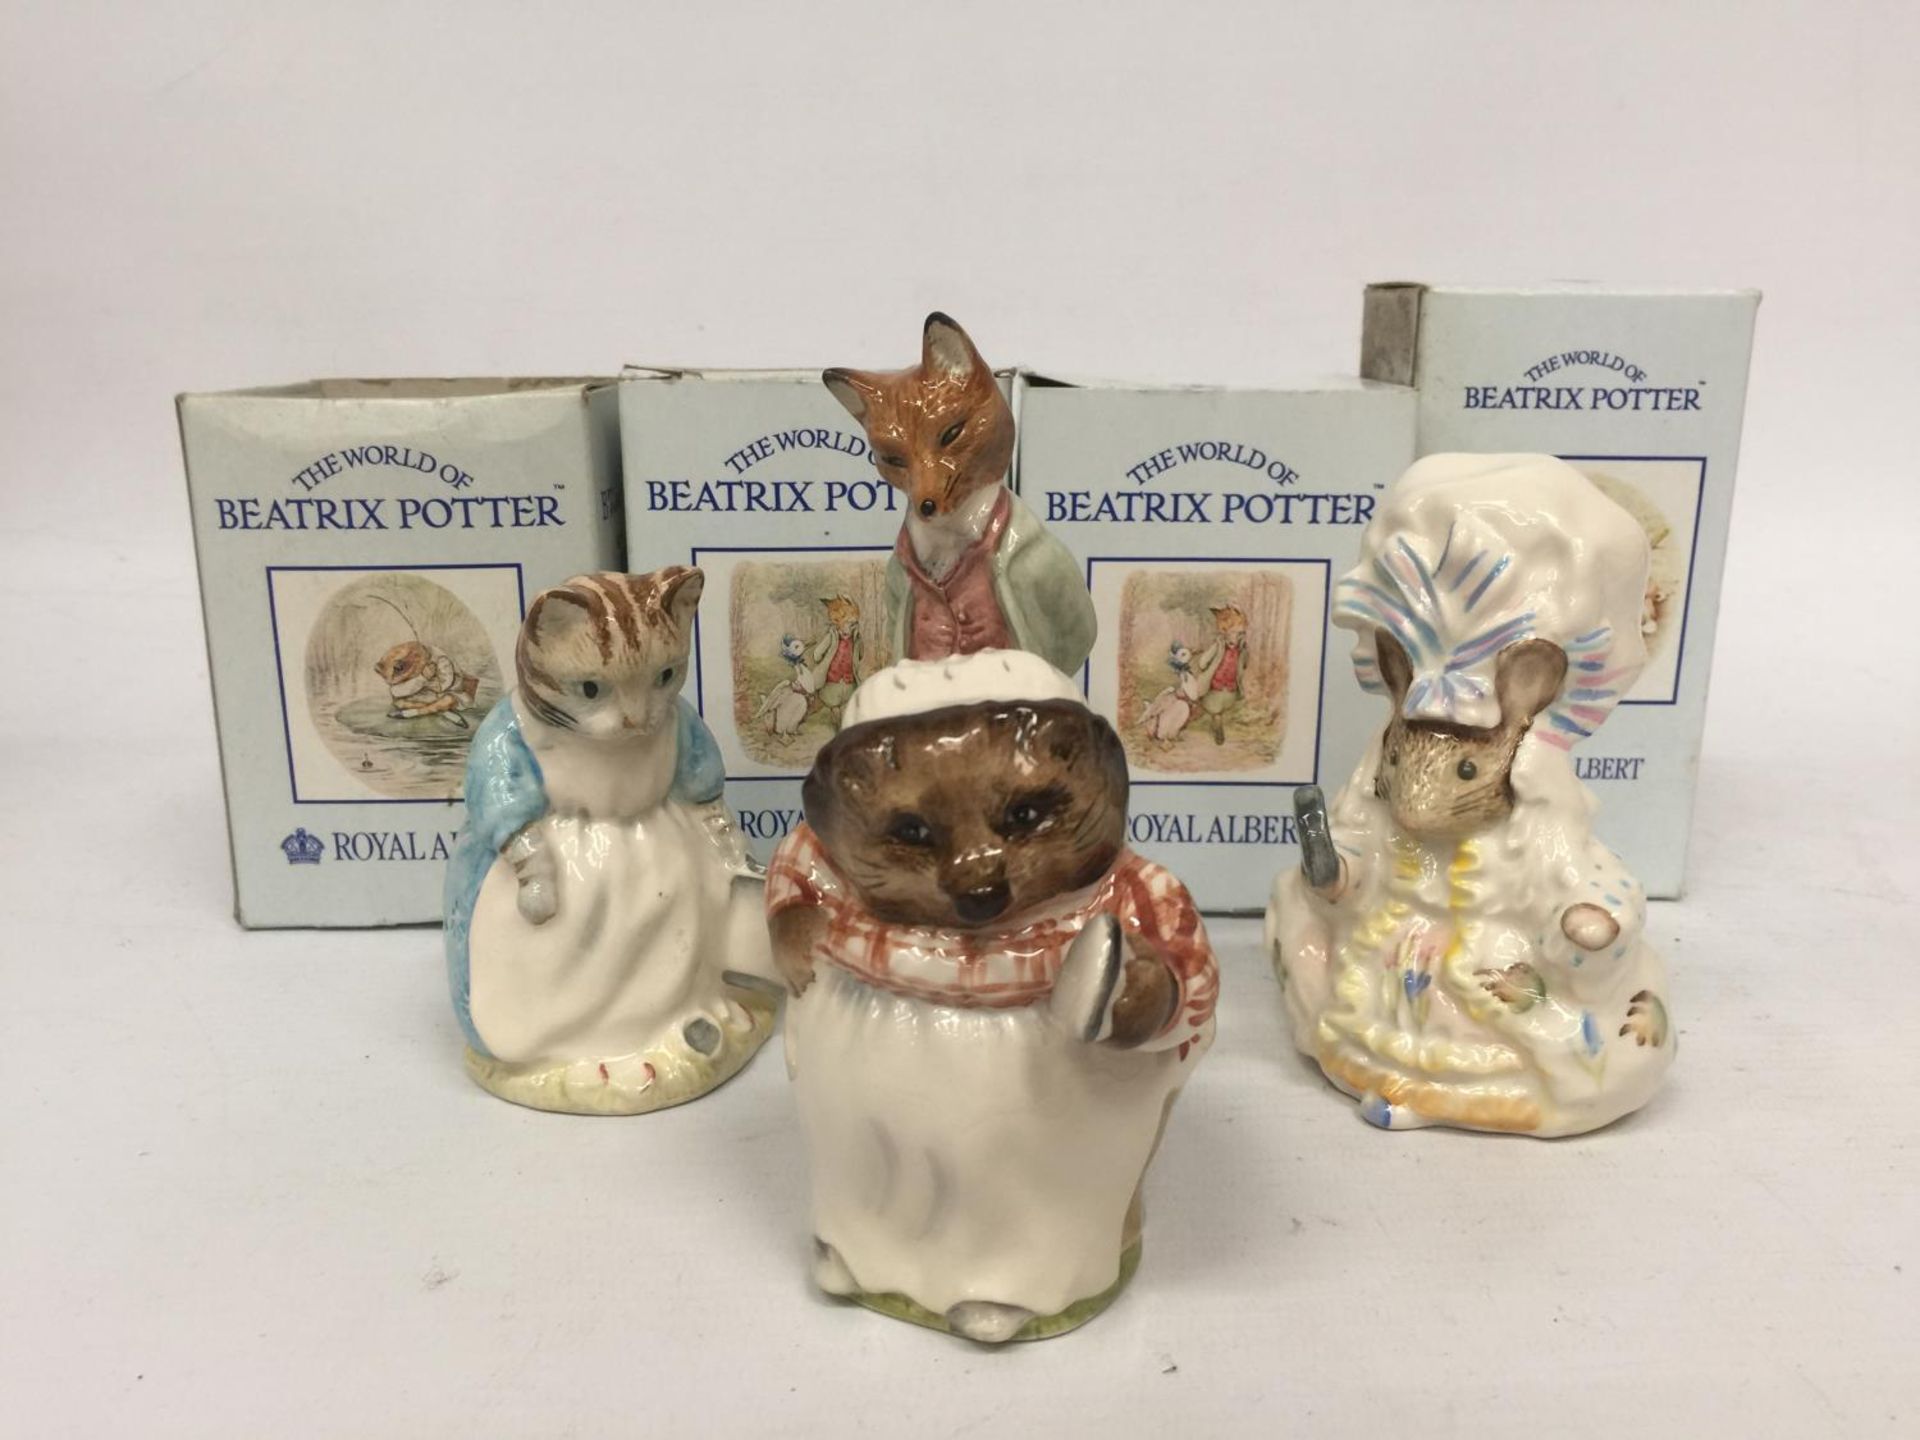 FOUR ROYAL ALBERT BEATRIX POTTER FIGURES IN ORIGINAL BOXES TO INCLUDE RIBBY AND THE PATTY PAN,